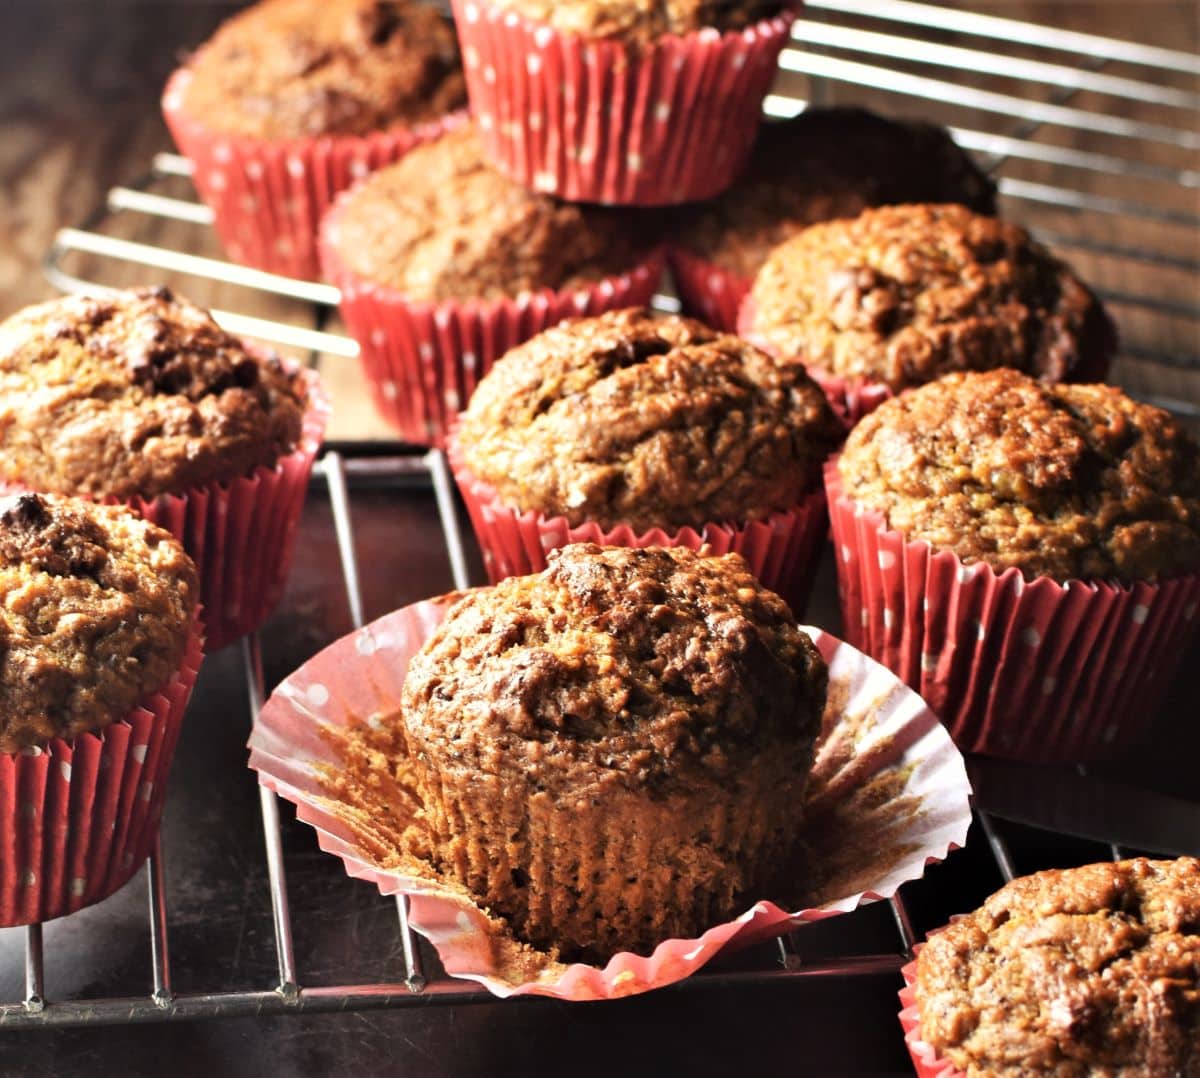 Side view of carrot muffins in red cases.